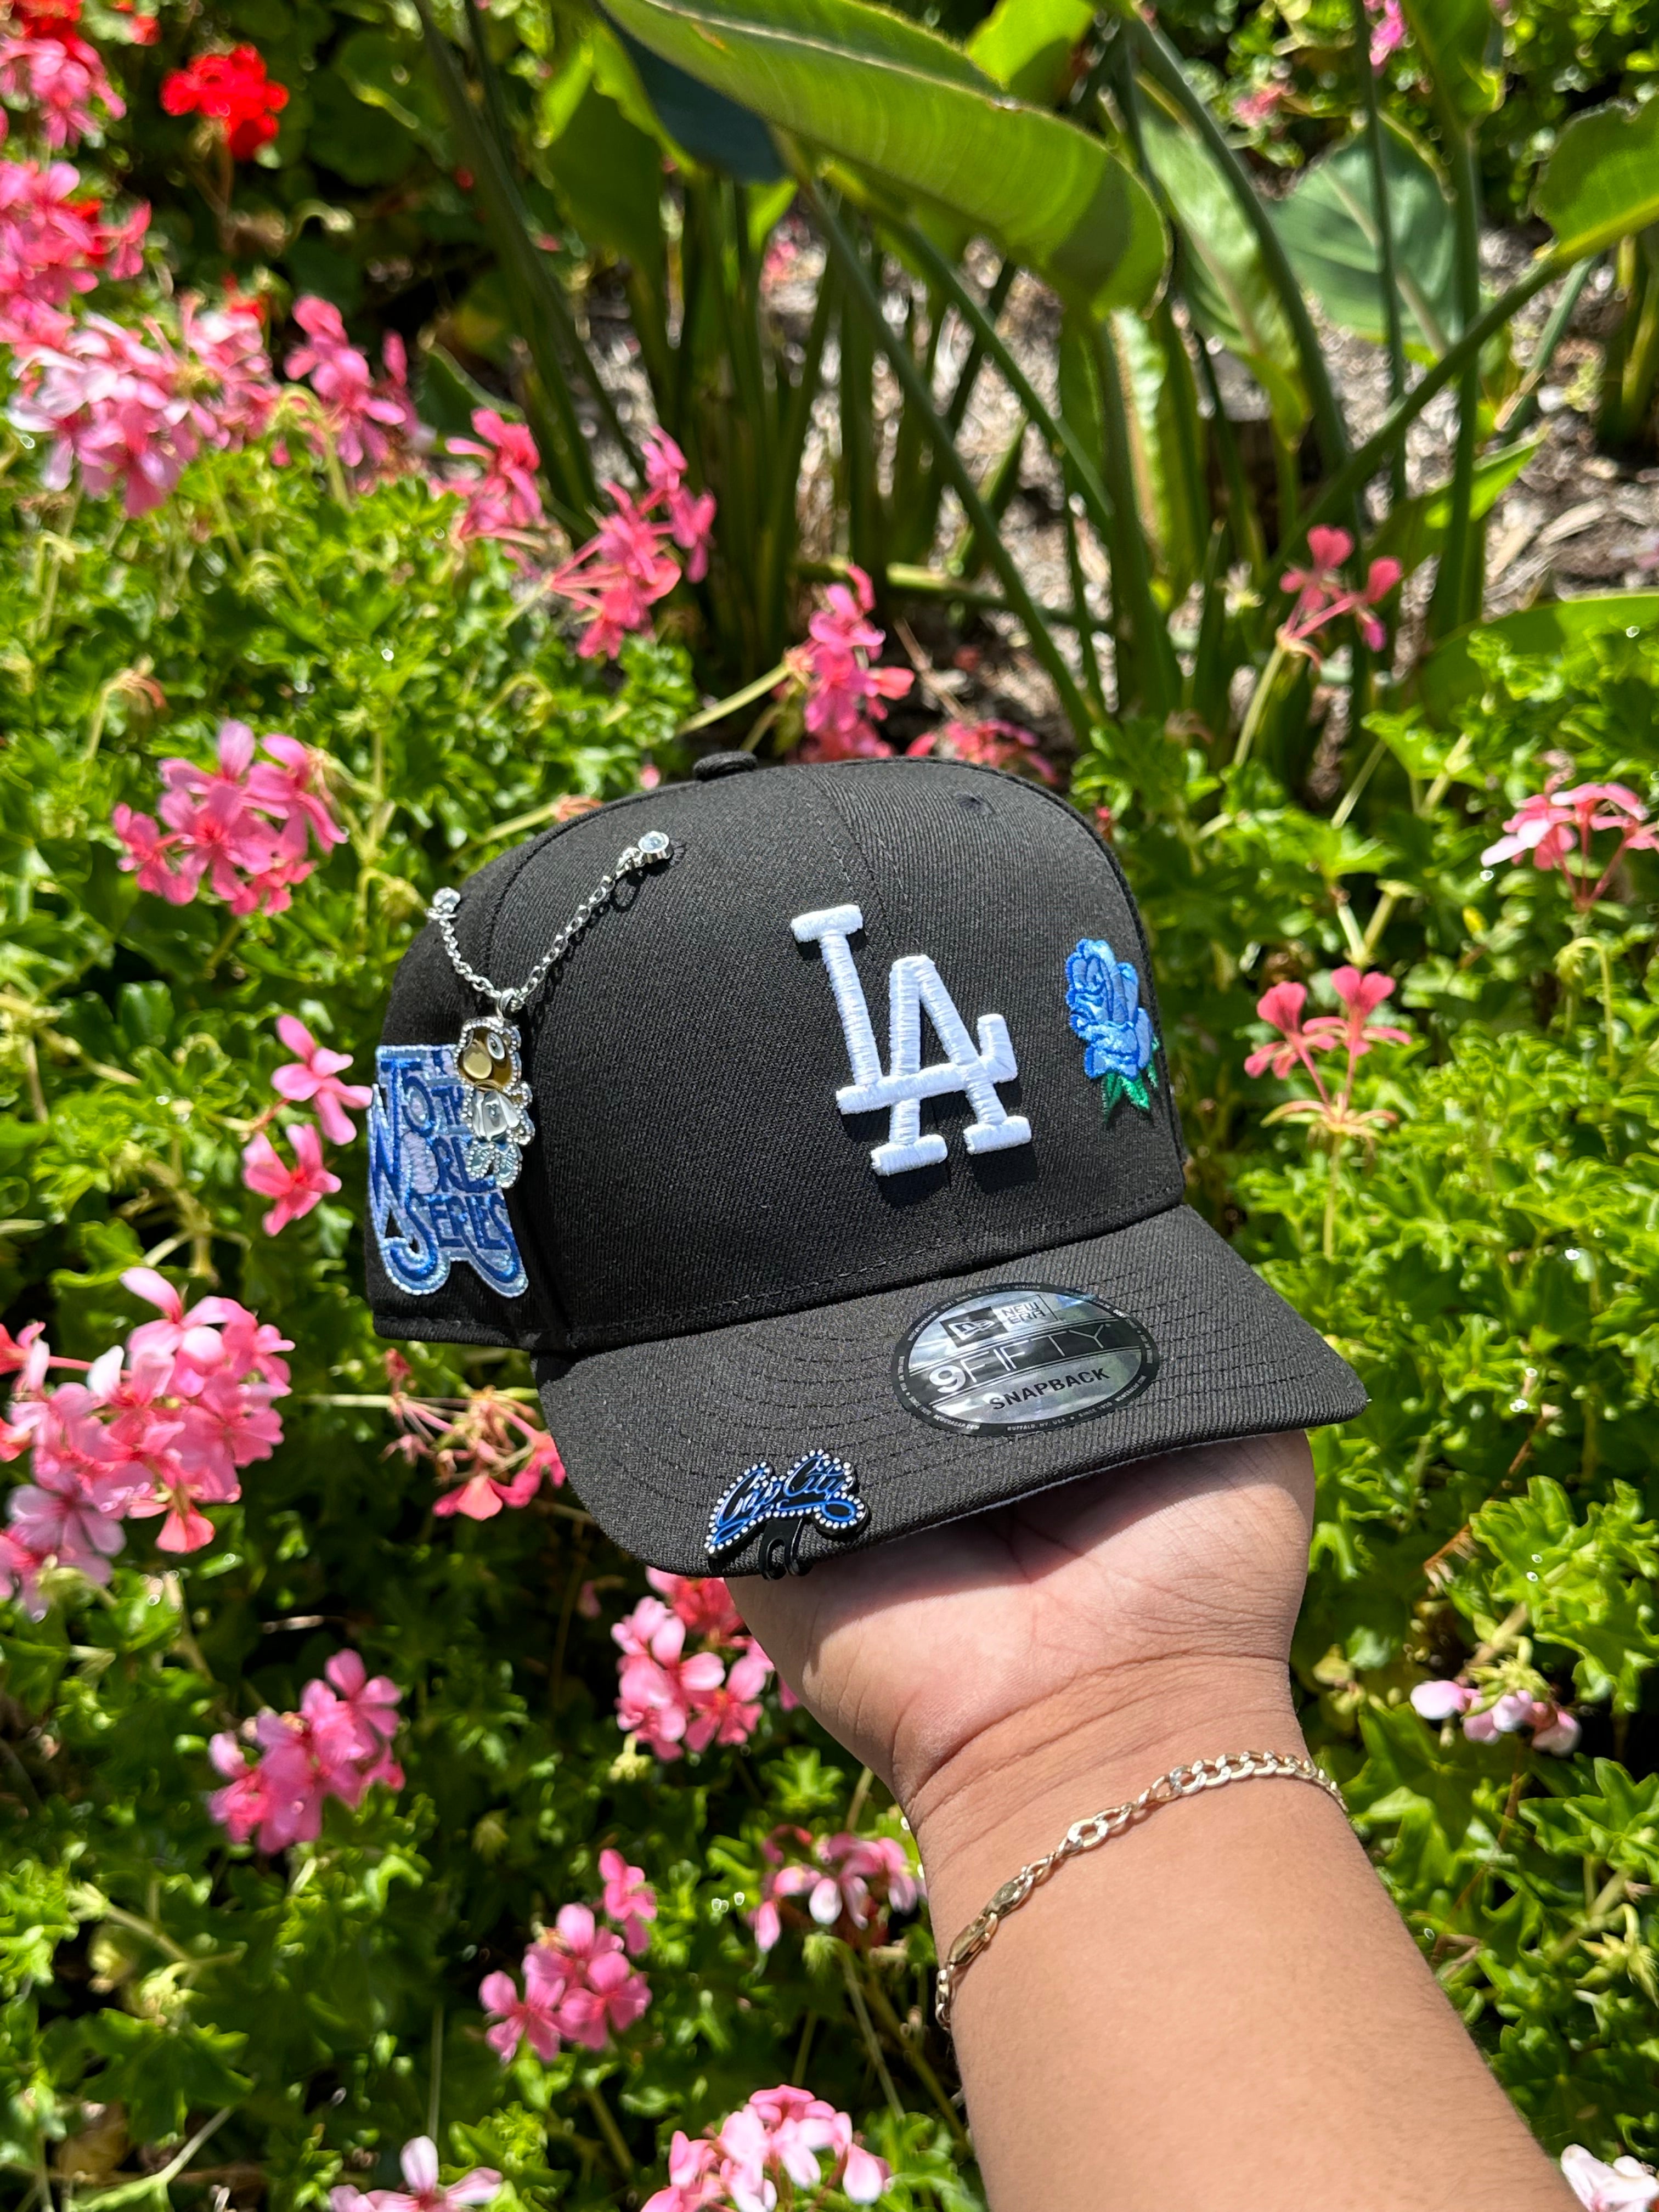 NEW ERA EXCLUSIVE 9FIFTY BLACK LOS ANGELES DODGERS SNAPBACK W/ BLUE ROSE + 75TH WORLD SERIES PATCH